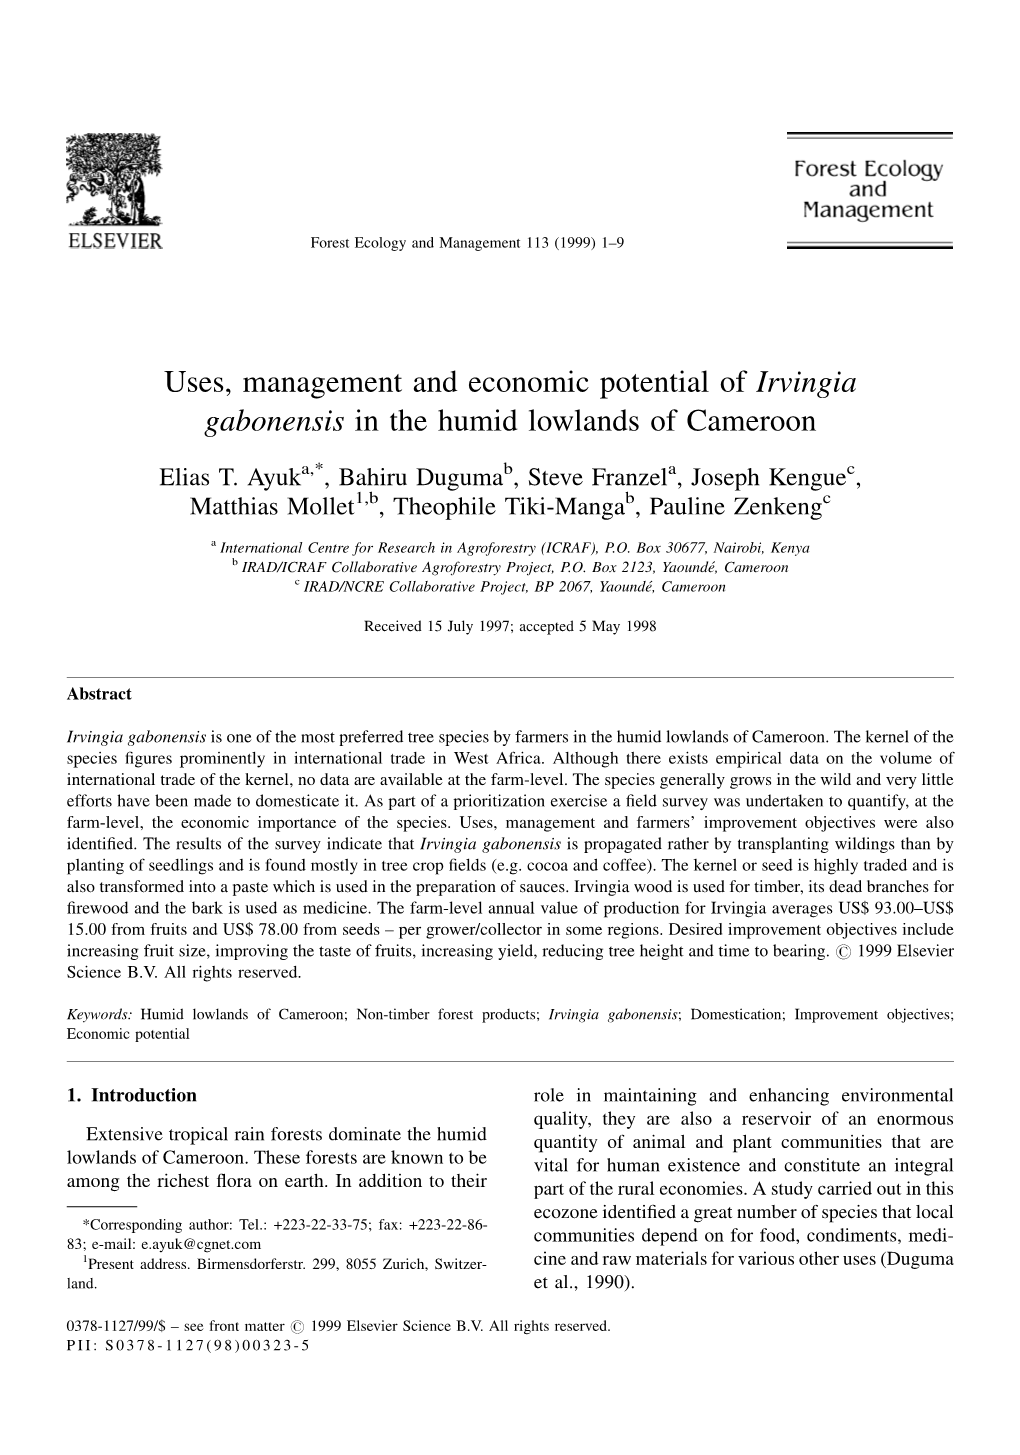 Uses, Management and Economic Potential of Irvingia Gabonensis in the Humid Lowlands of Cameroon